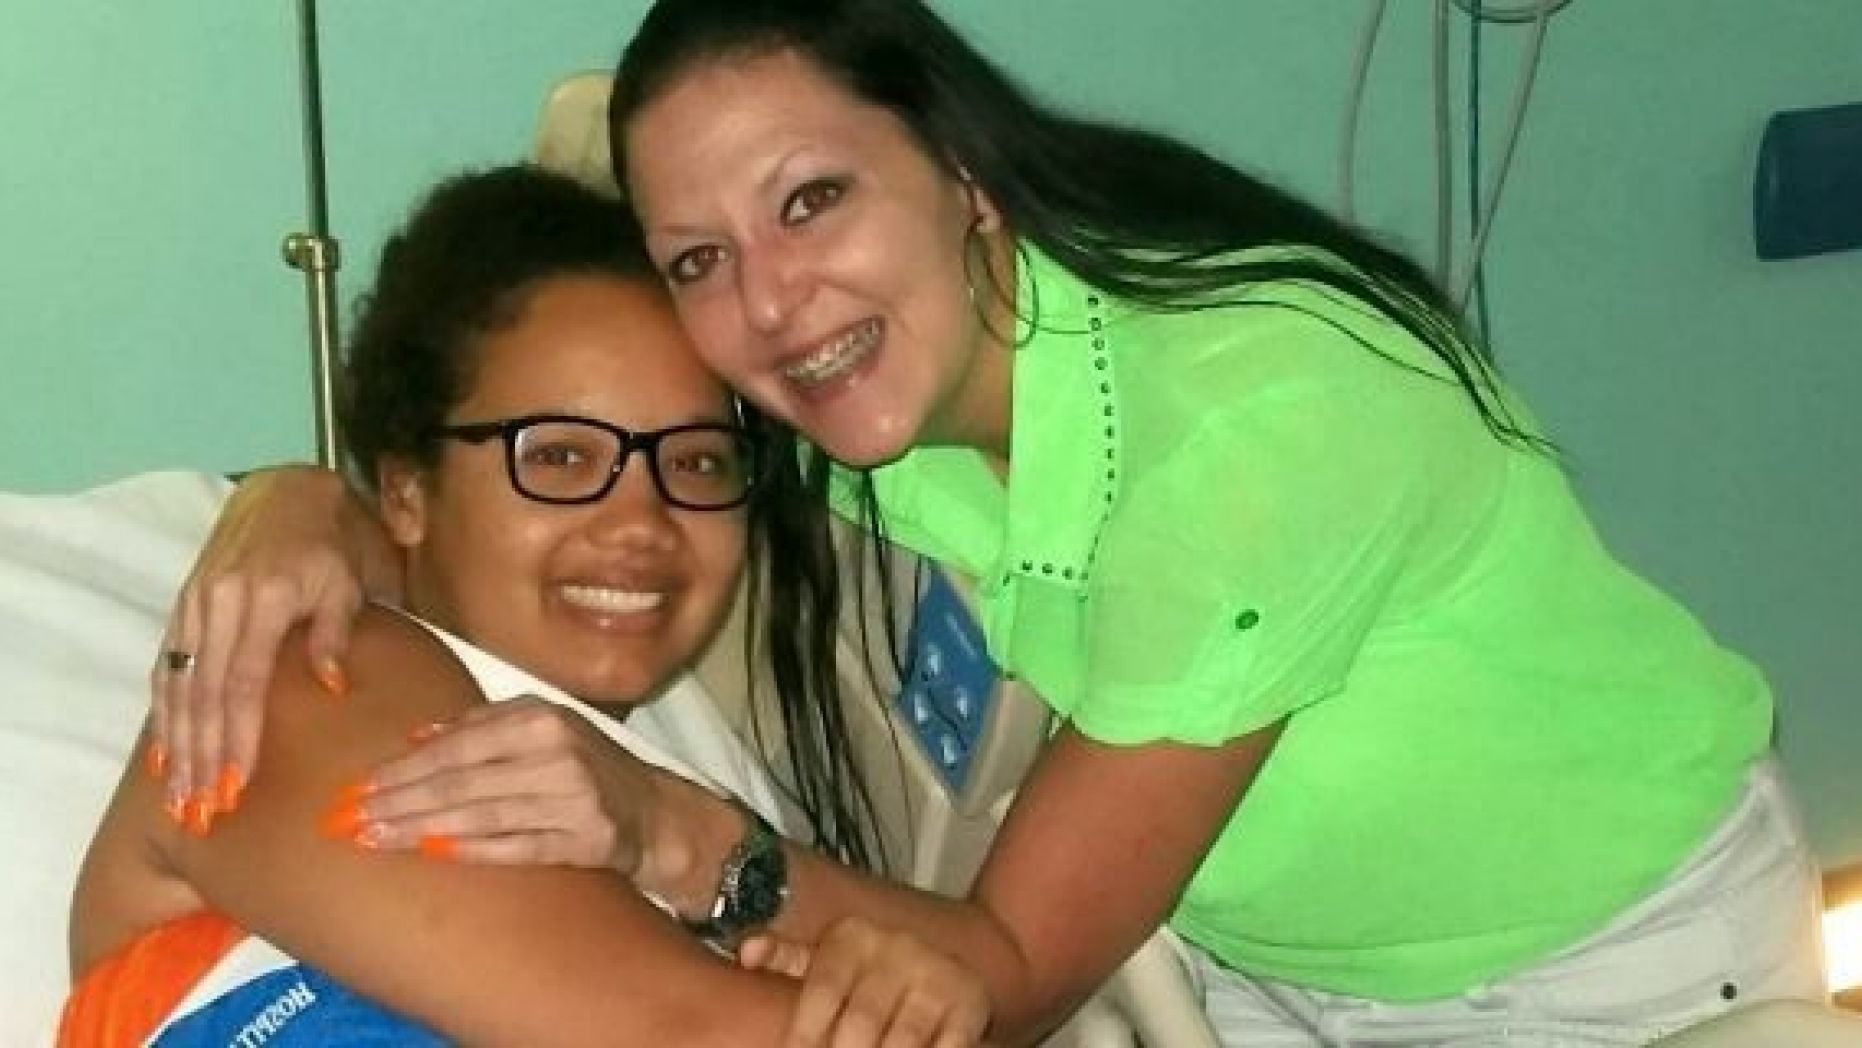 Gabrielle Newell, pictured with her aunt while in the hospital, said reconnecting with her faith in 2016 helped her find closure and forgiveness.